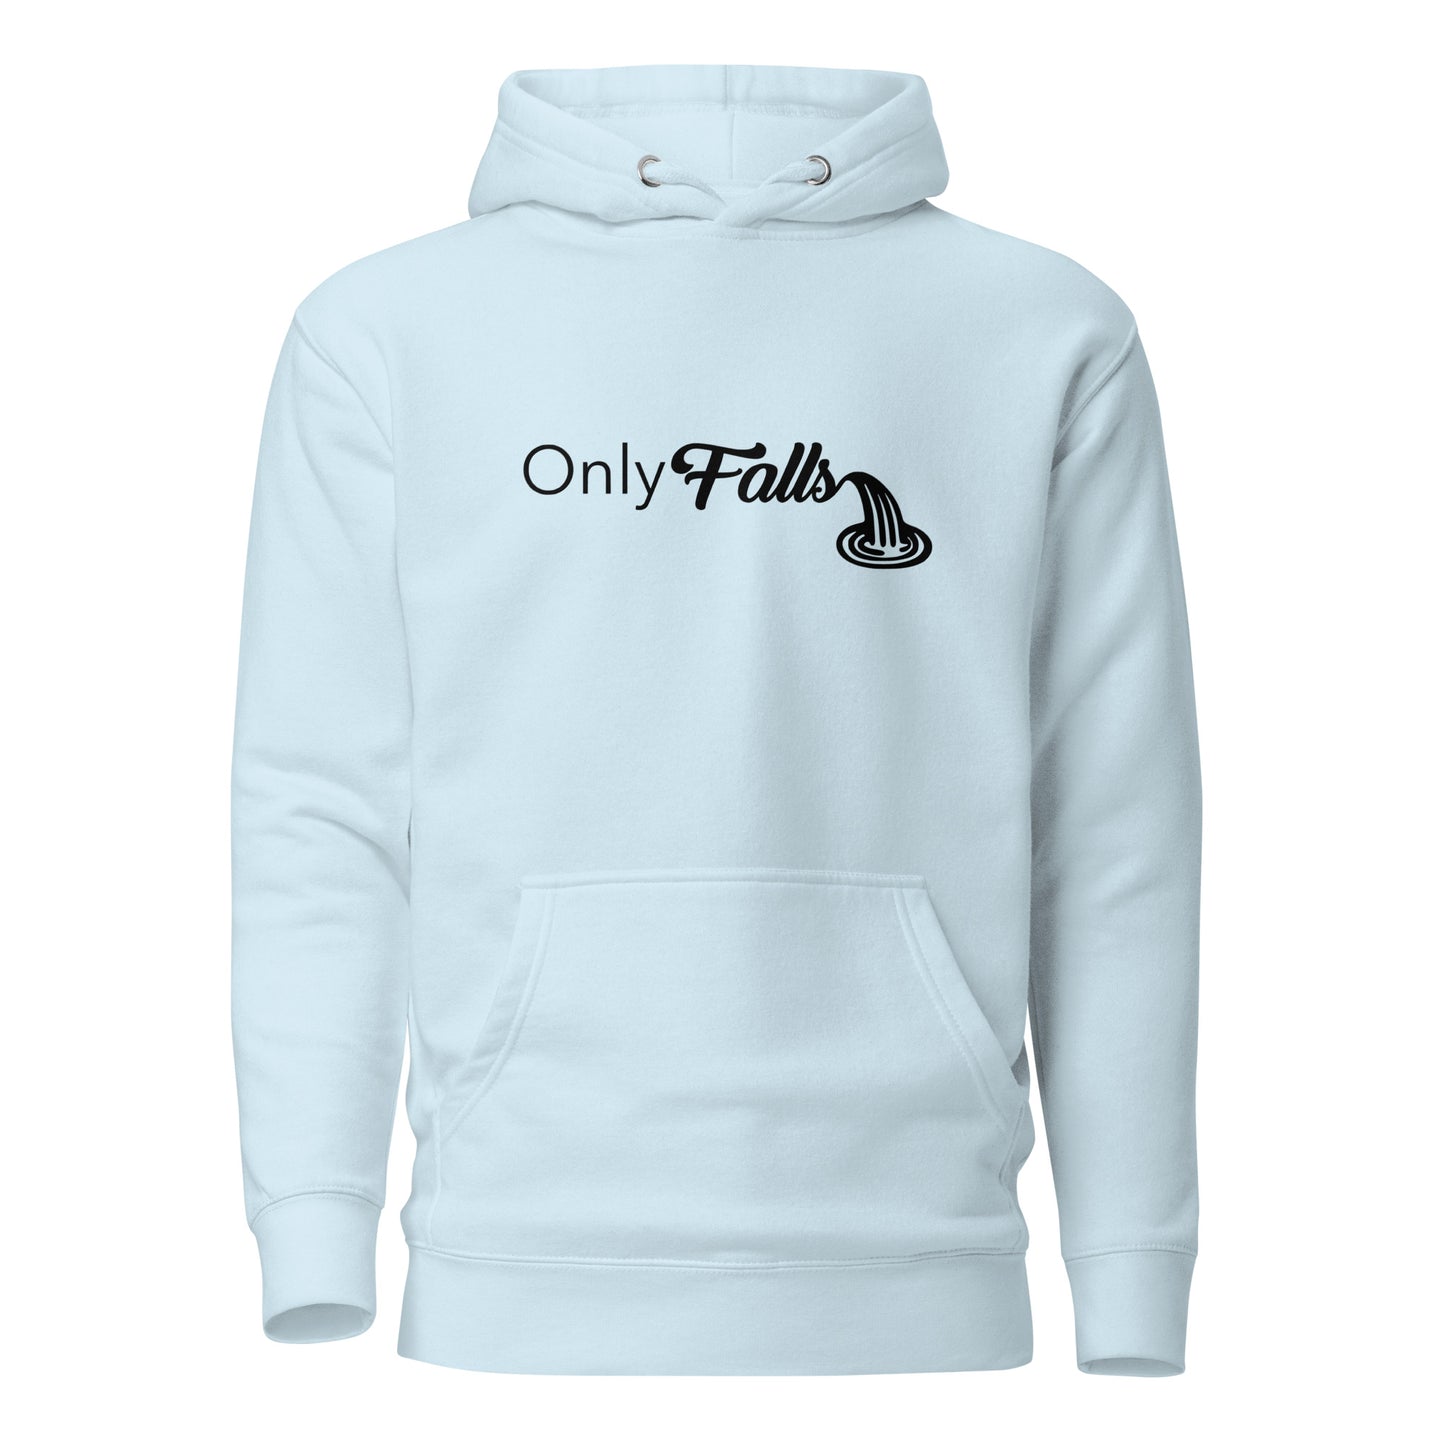 Only Falls Hoodie